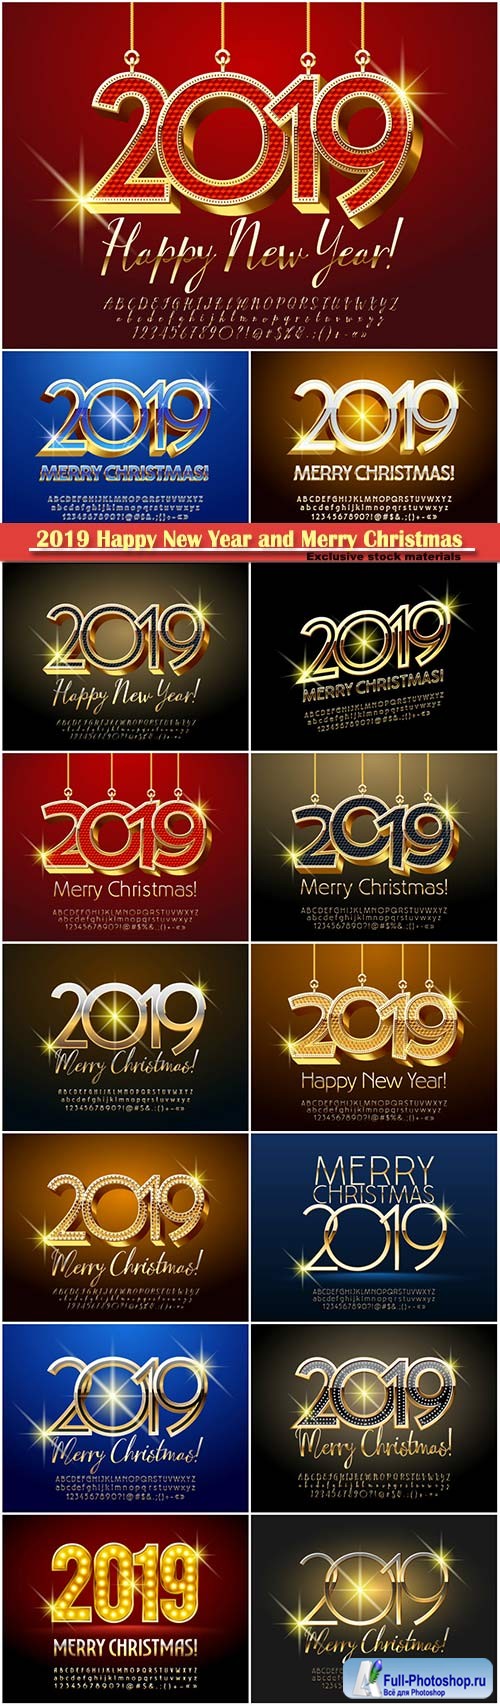 2019 Happy New Year and Merry Christmas design decorative